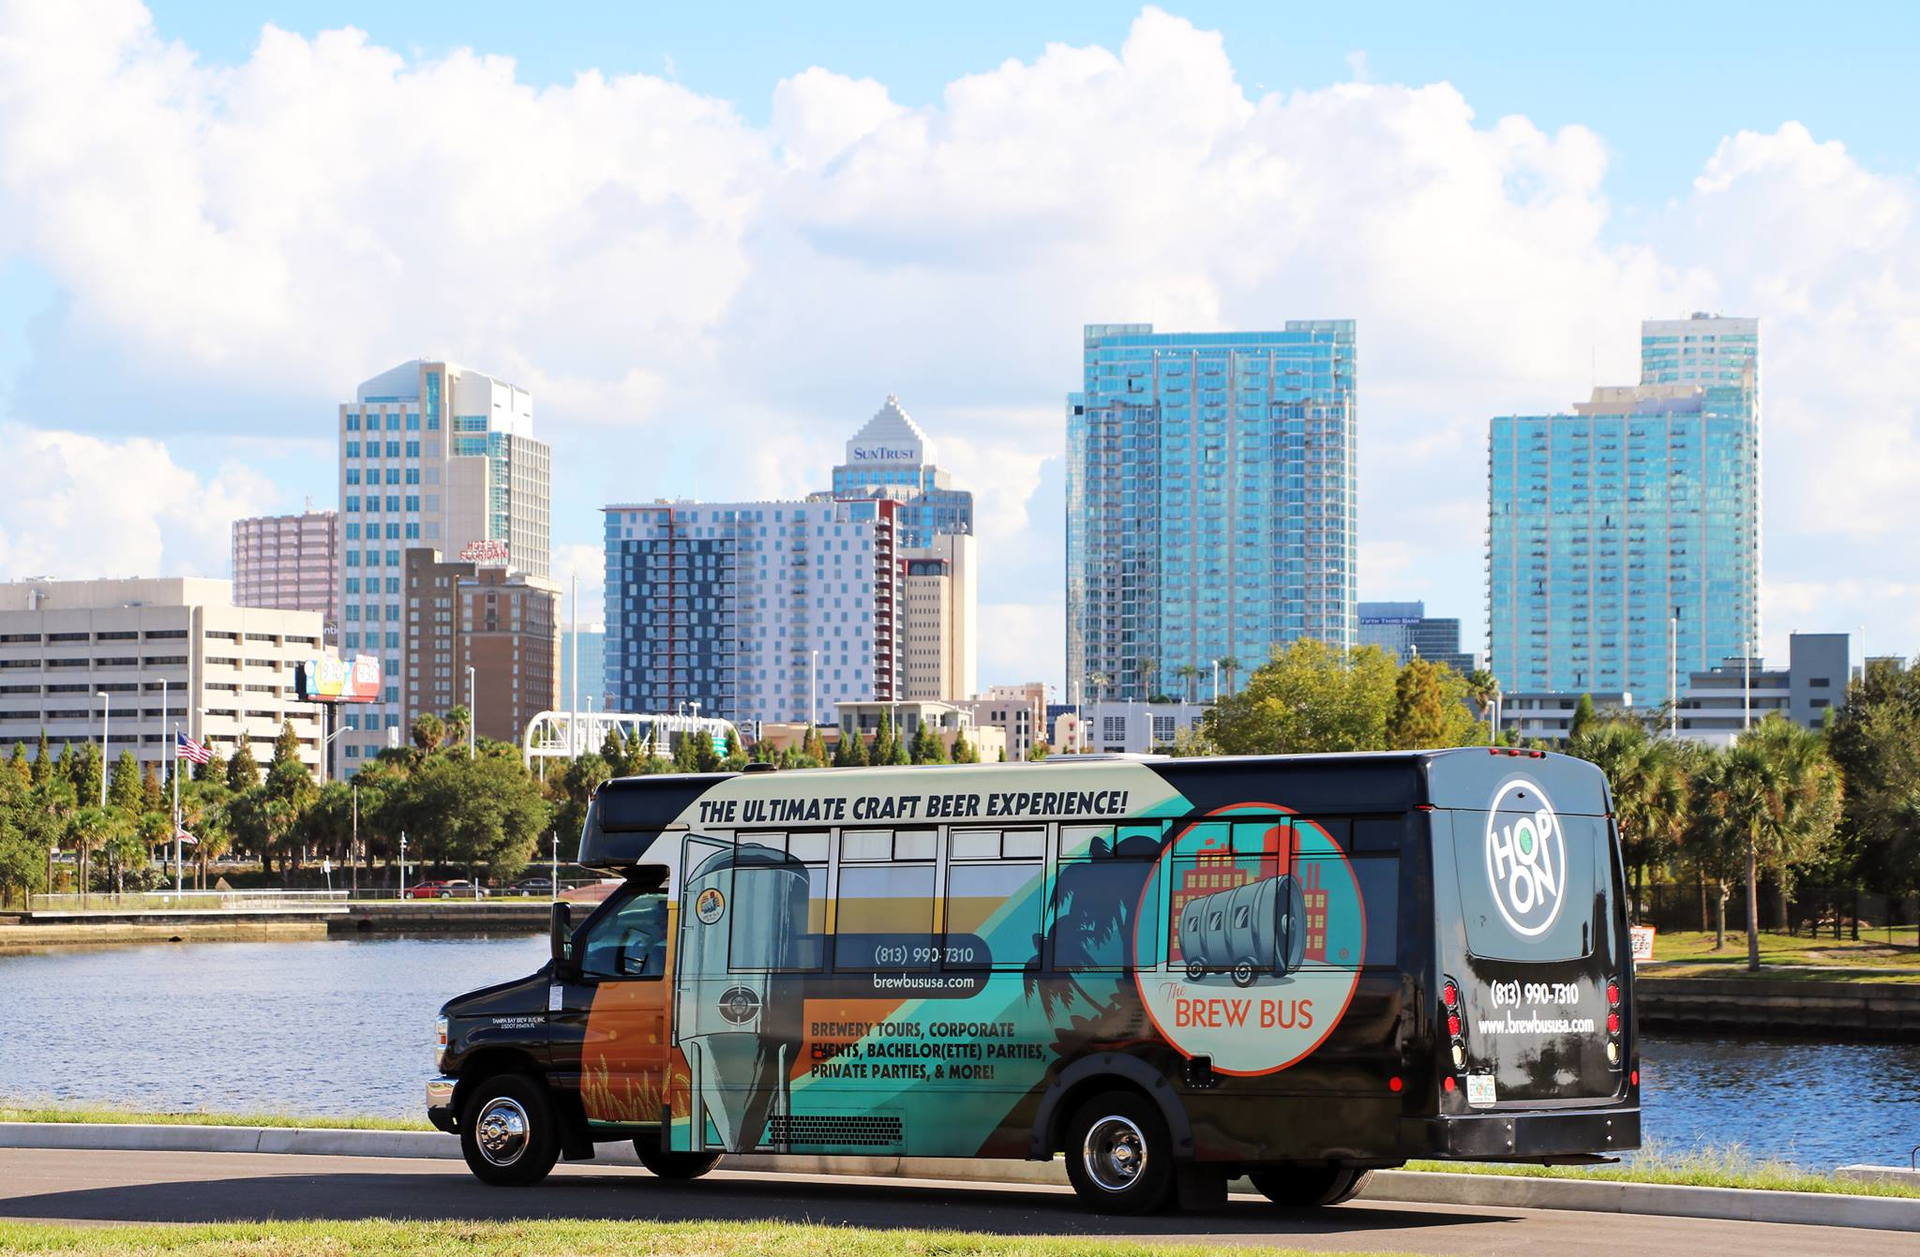 How to get to Amalie Arena in Tampa by Bus?